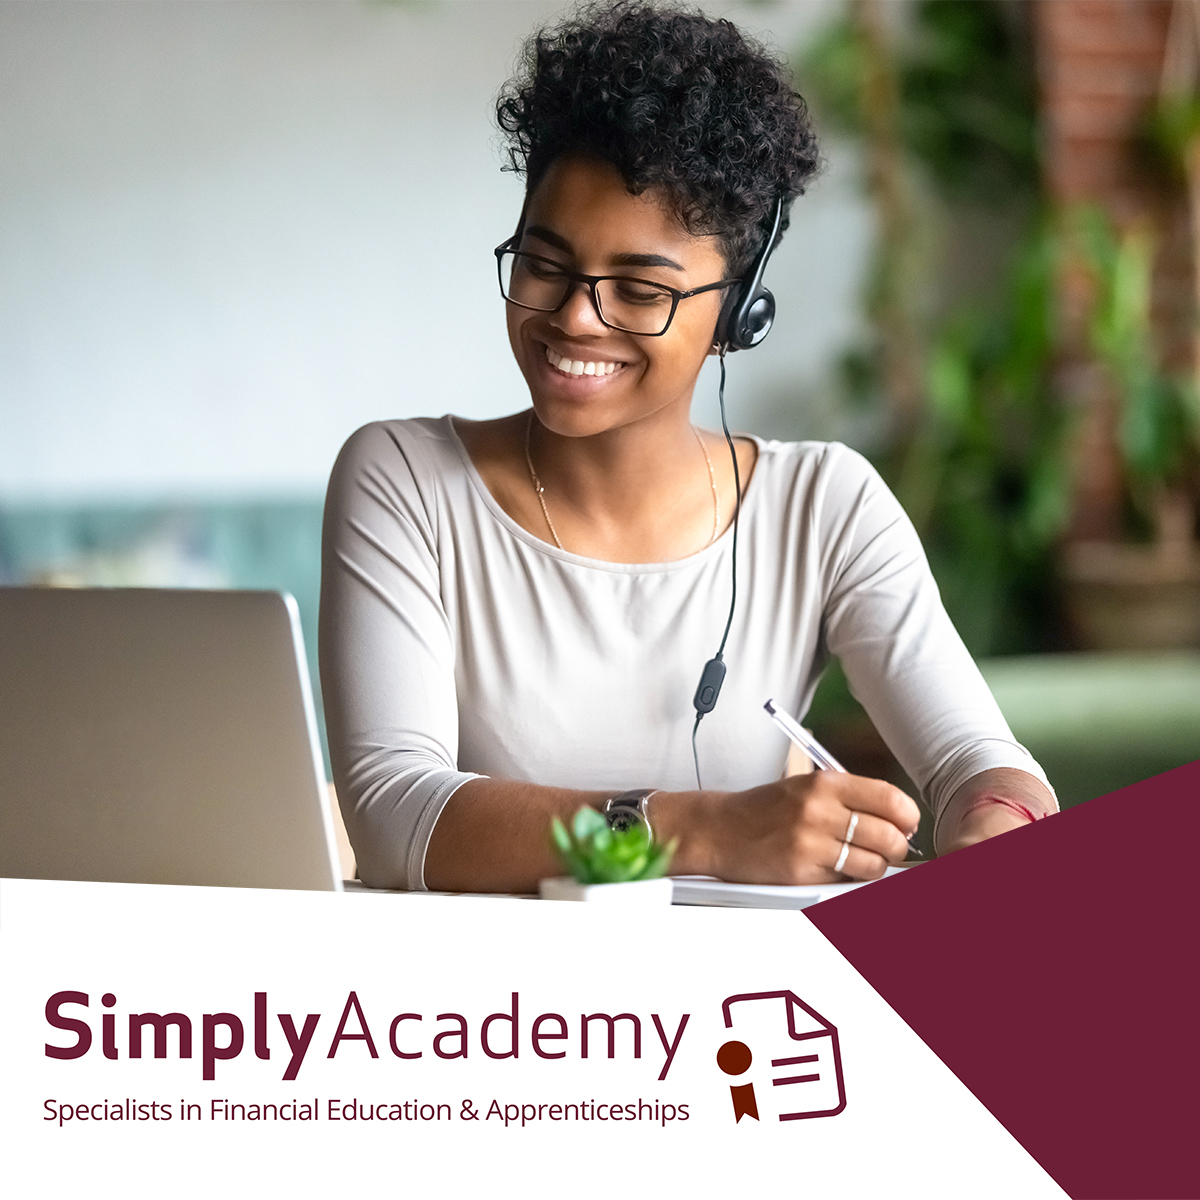 🚀 Booking our AdviserSkills course alongside #CeMAP or #DipFA will get your new career in #FinancialServices off to a flying start!

To find out more and book your courses, visit simplyacademy.com/our-courses/ad…